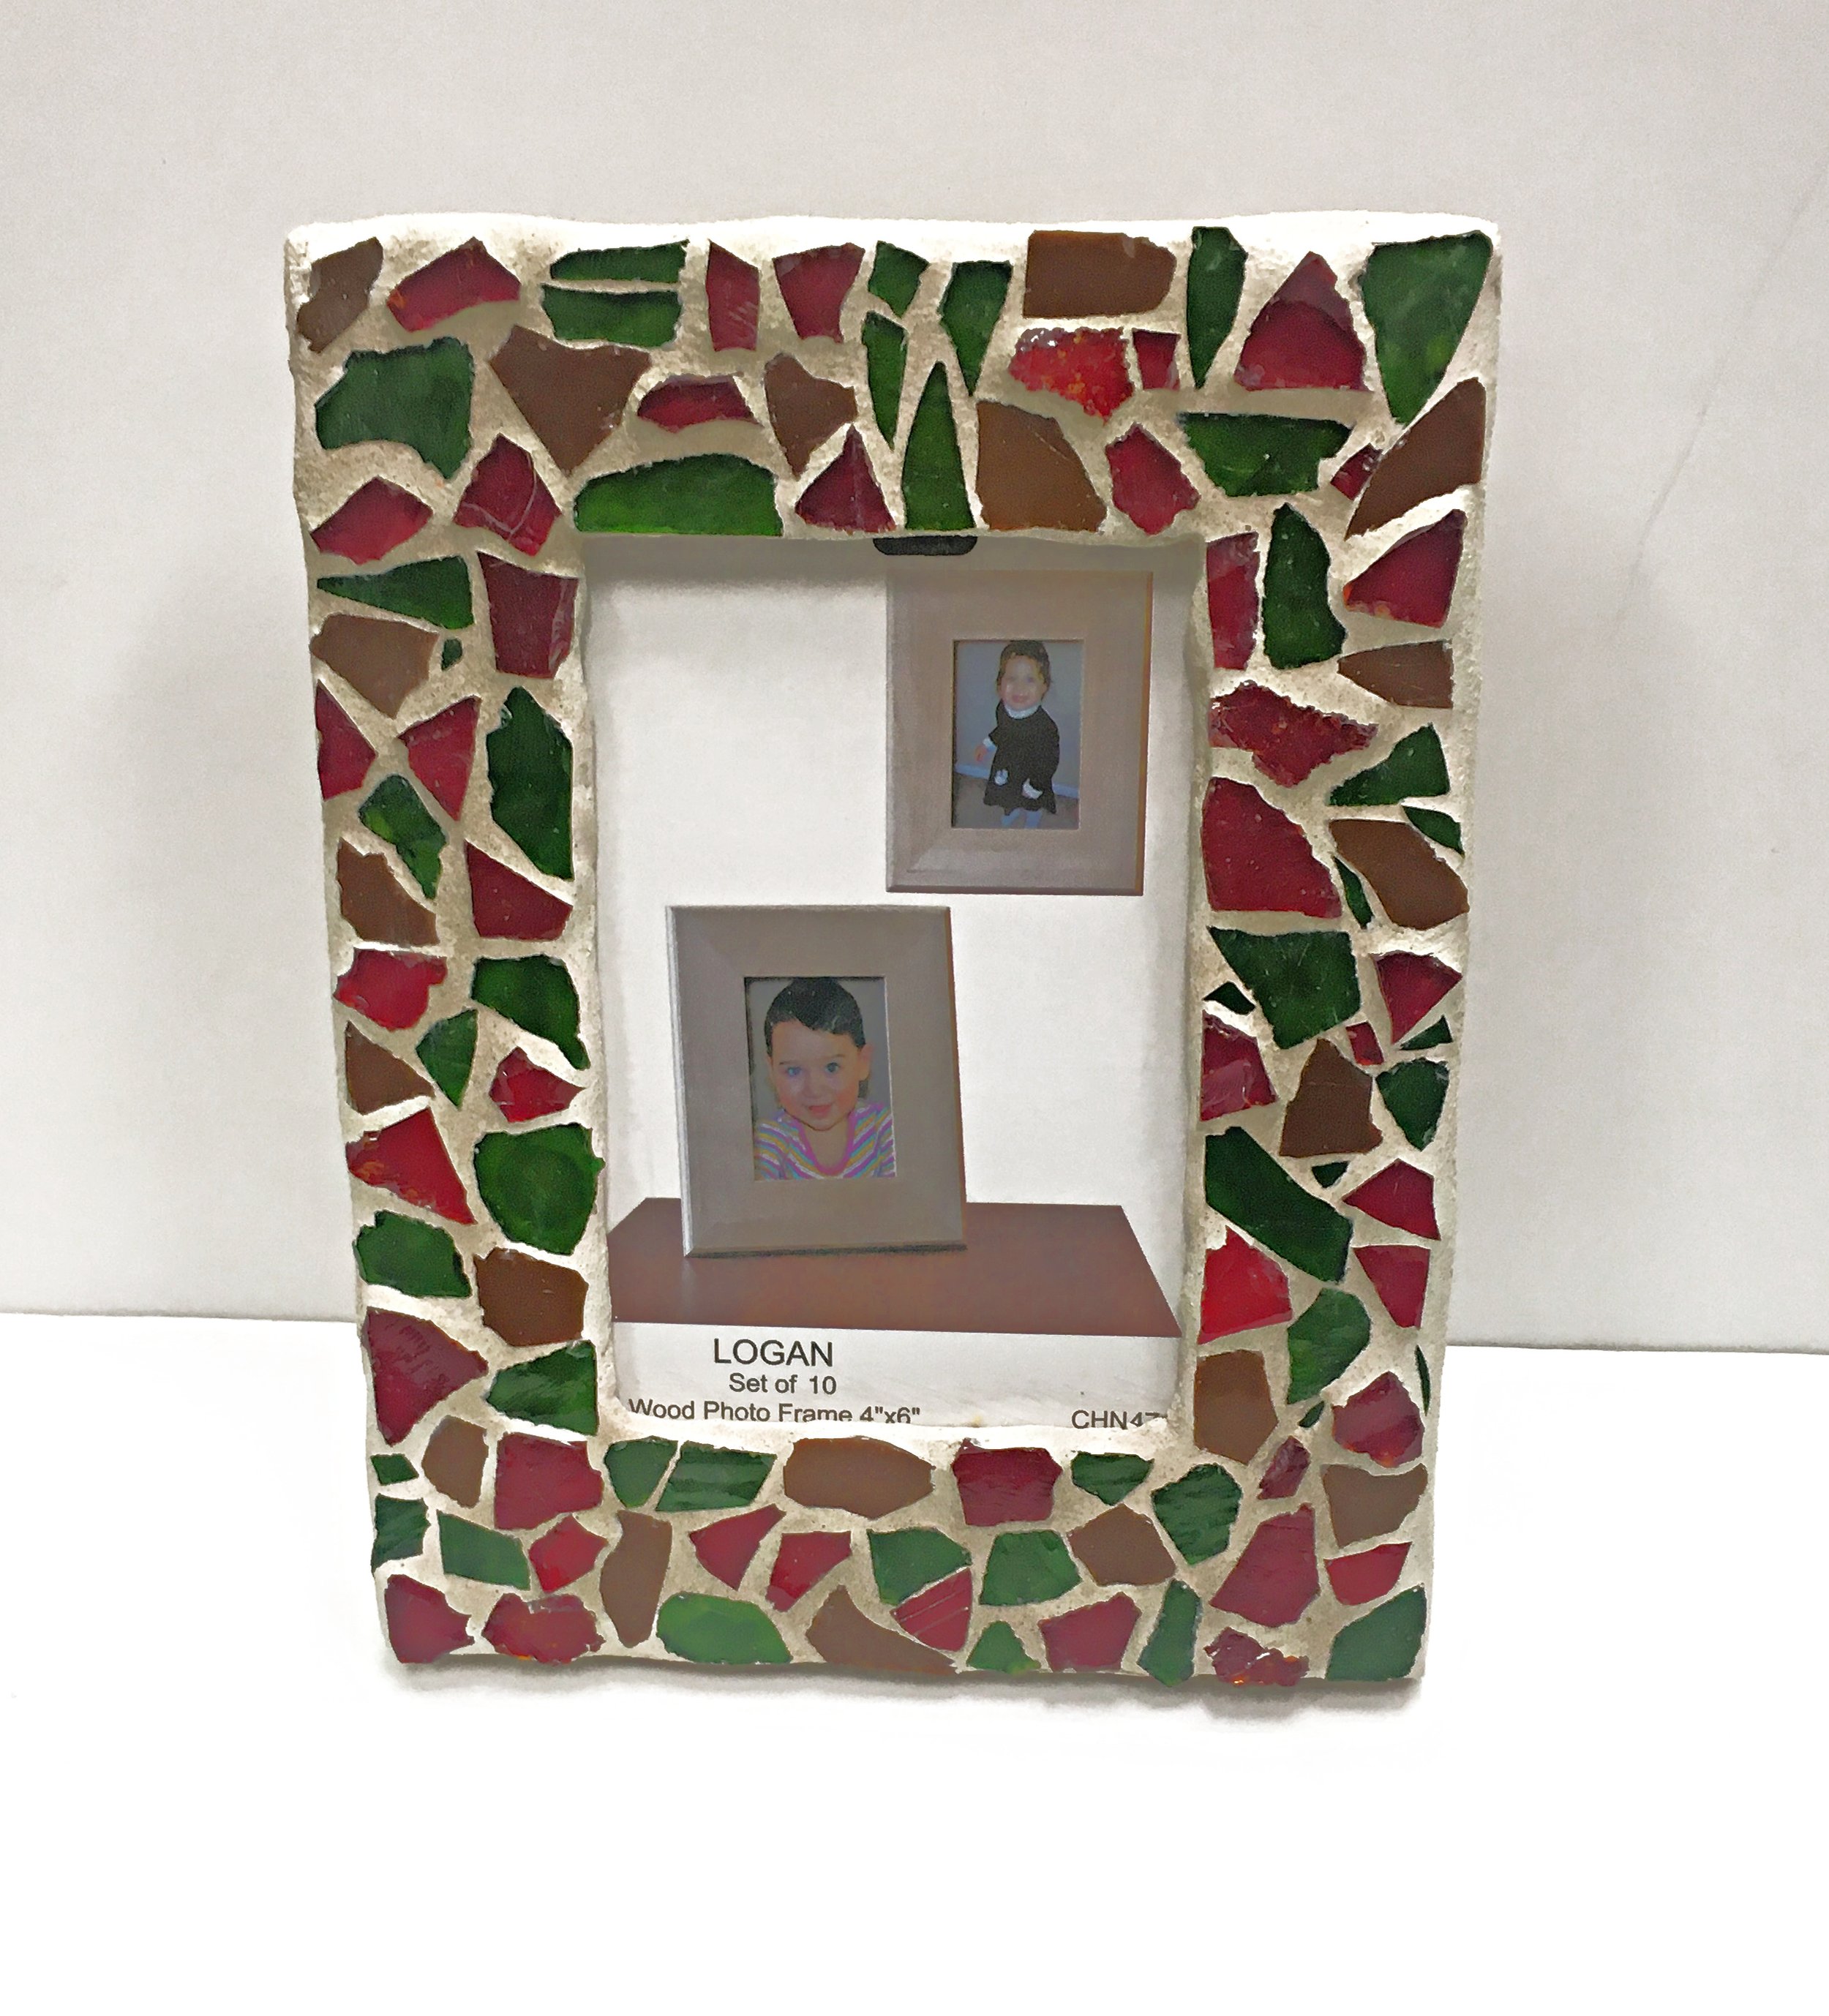 _email mosaic frame red & green.jpg